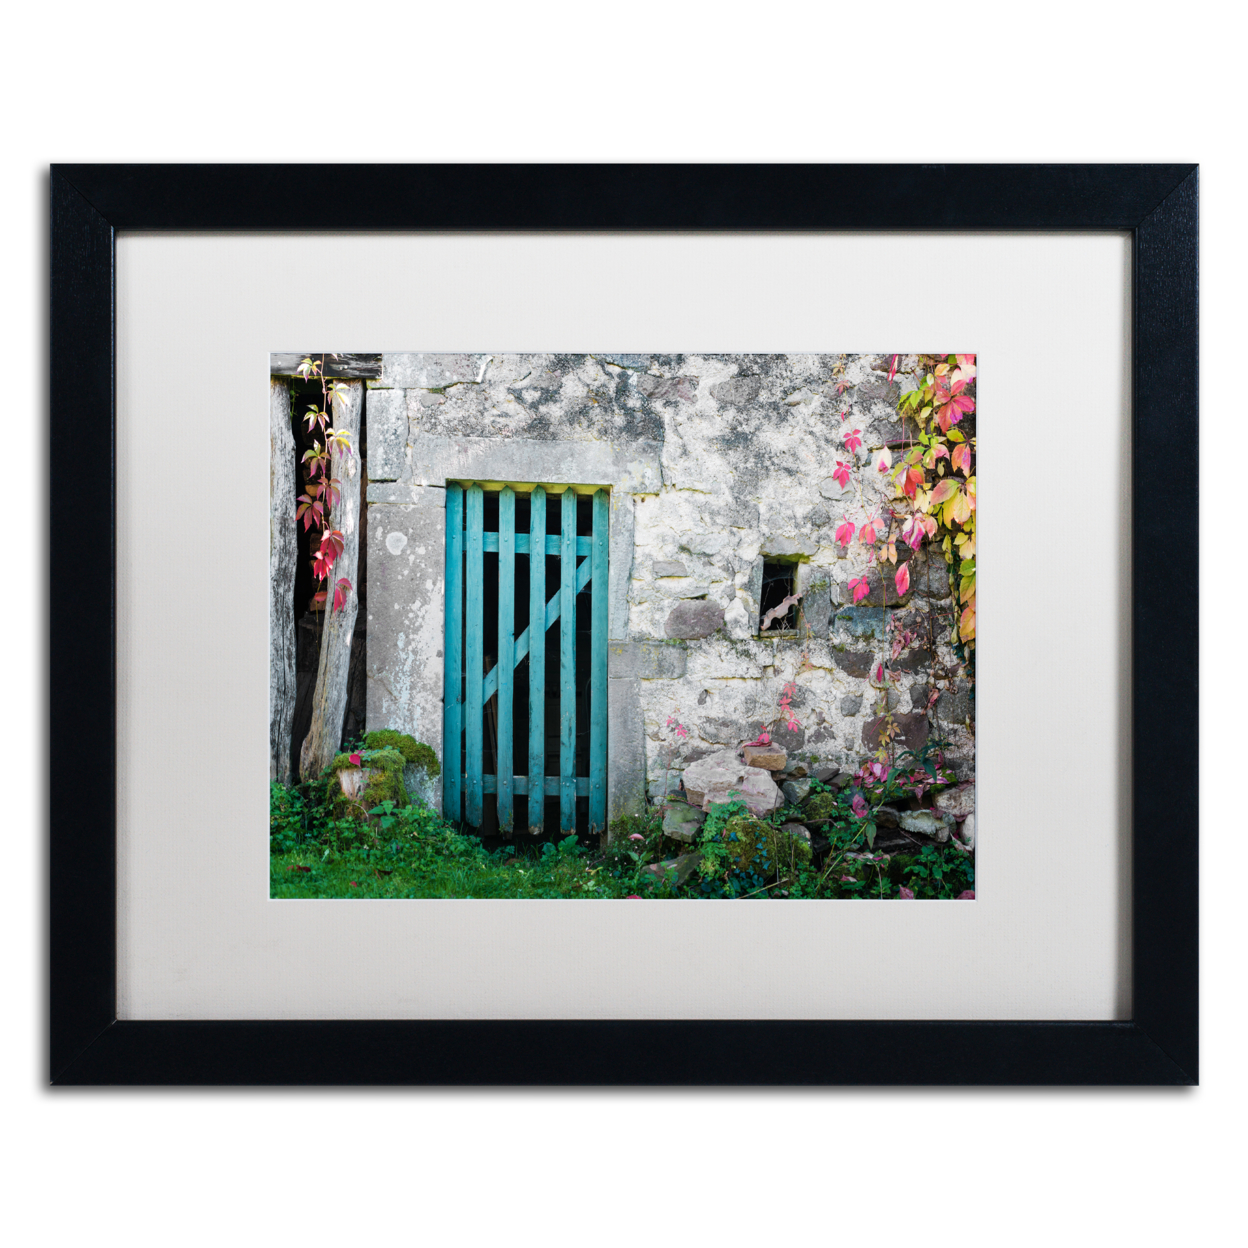 Philippe Sainte-Laudy 'The Old Wooden Door' Black Wooden Framed Art 18 X 22 Inches